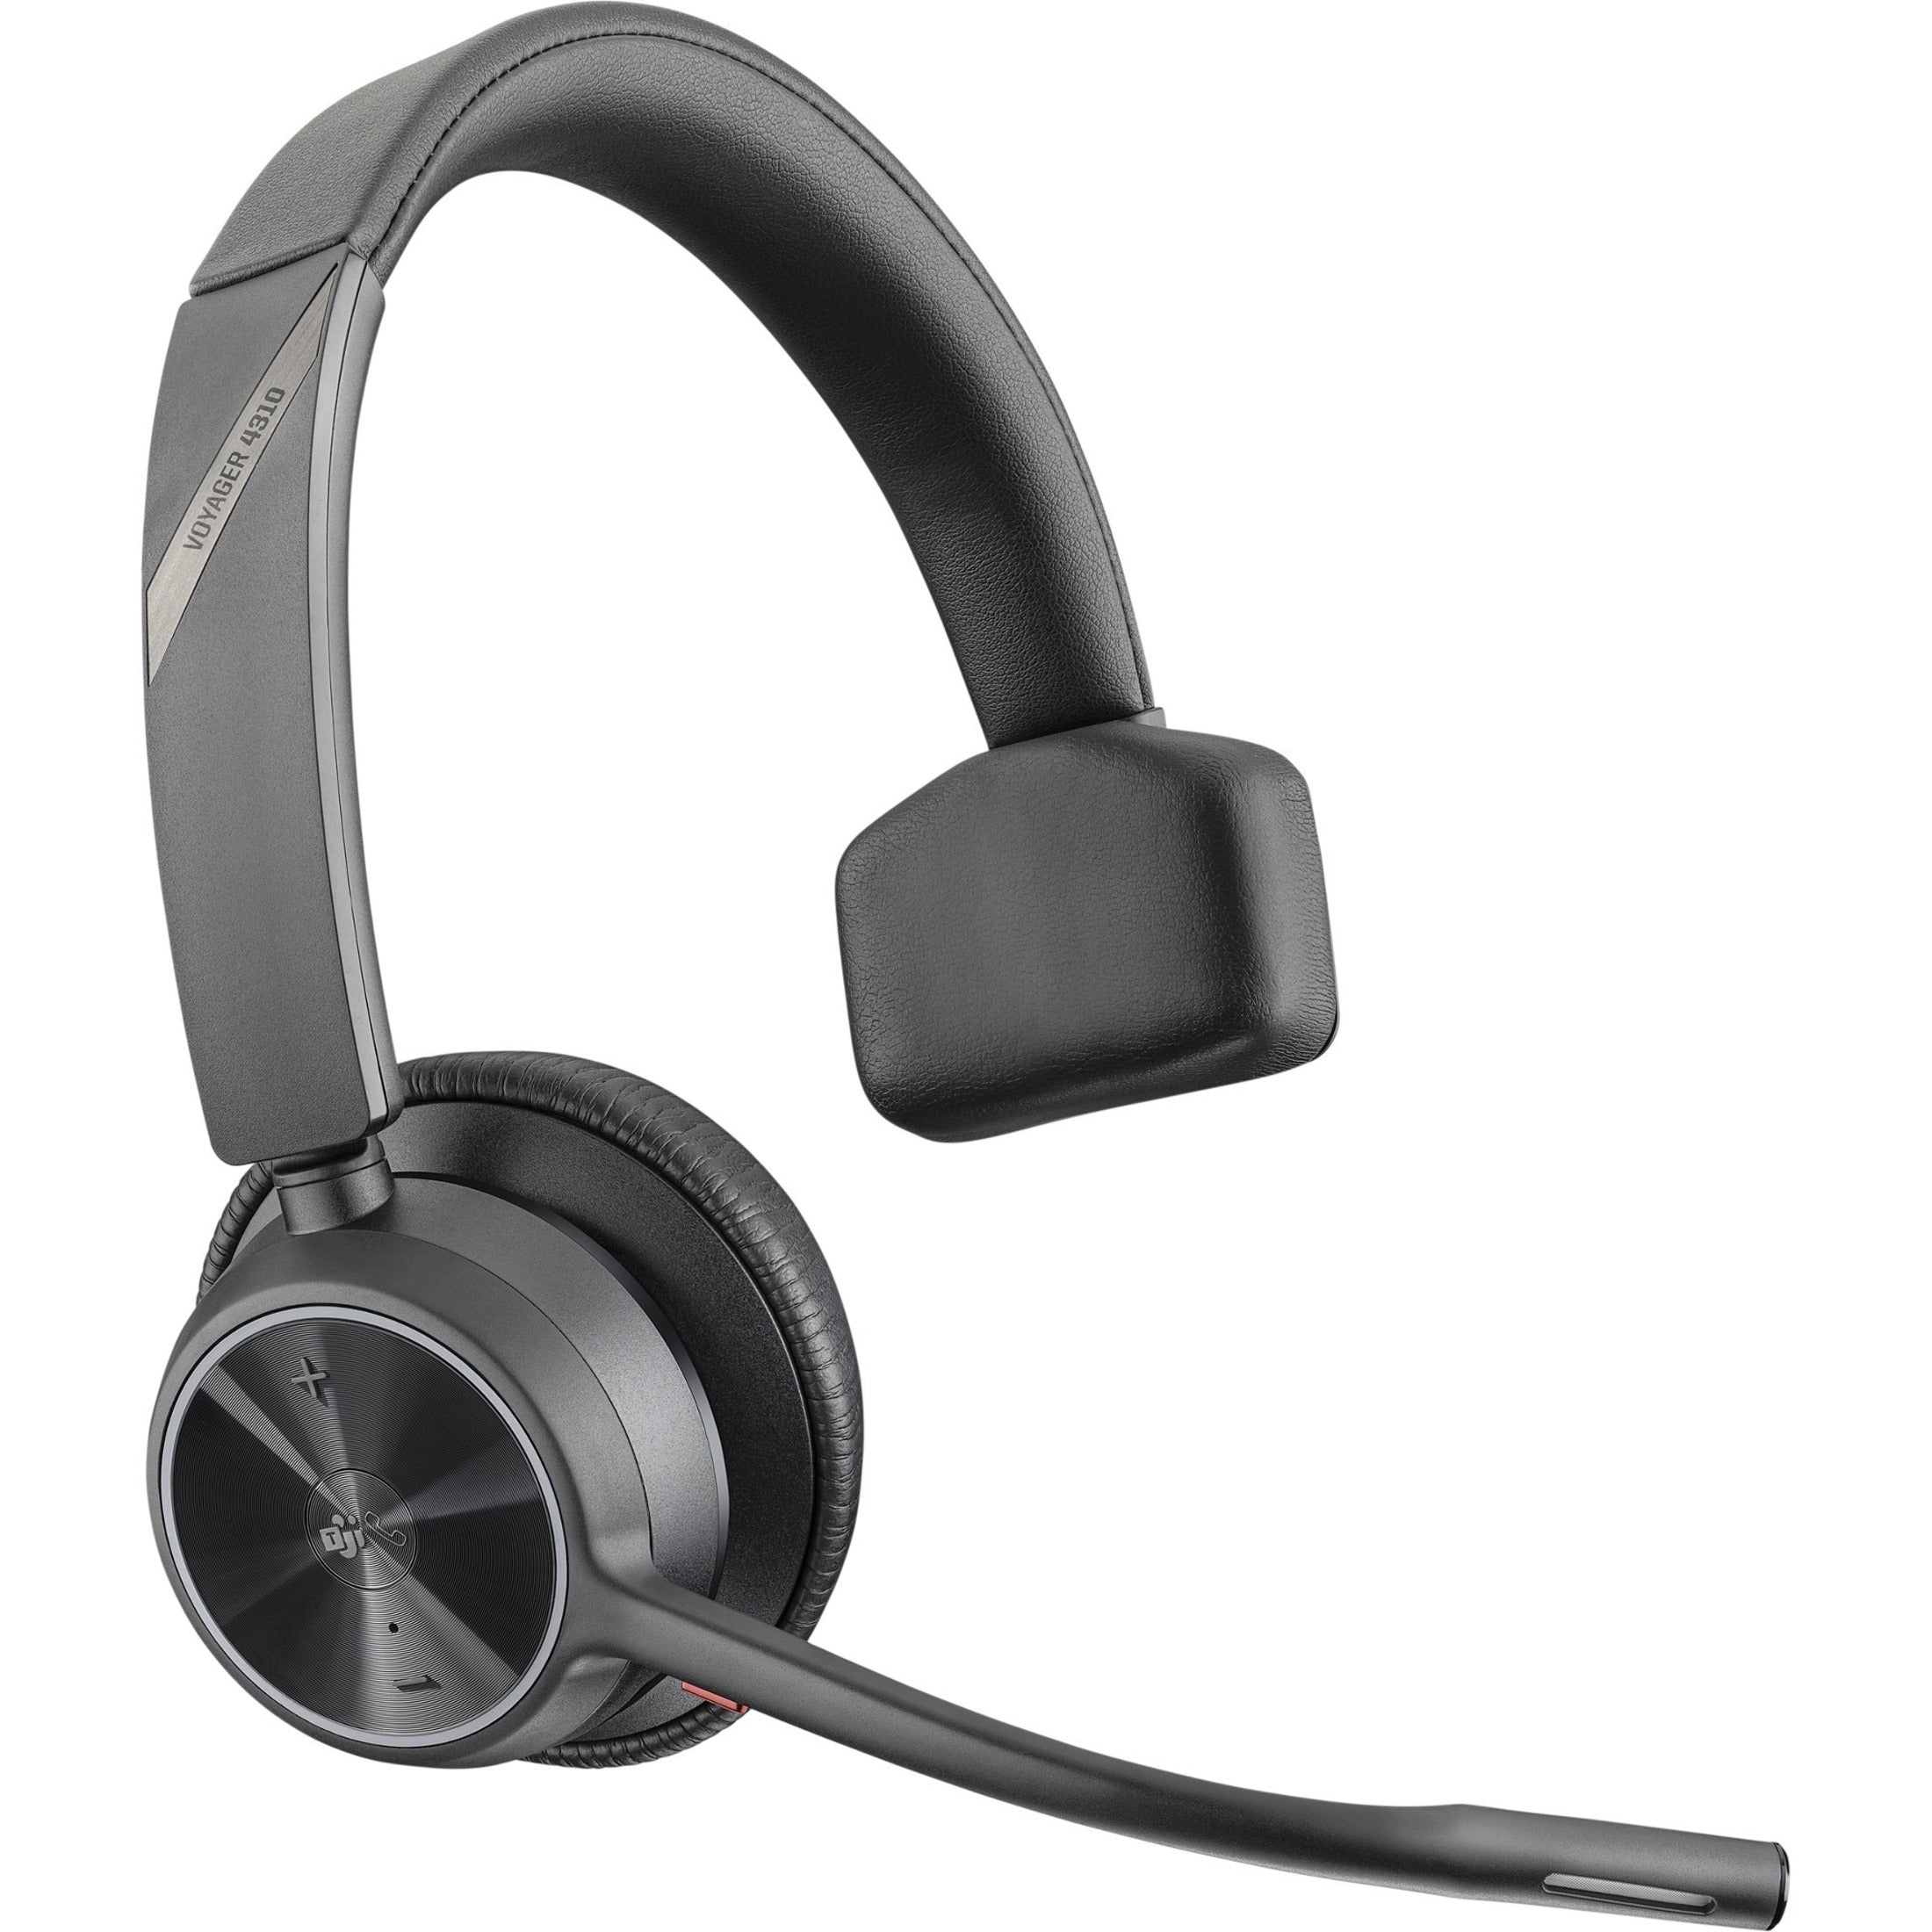 Poly 218470-01 Voyager 4300 UC 4310 UC Headset, Wireless Bluetooth Mono Ear-cup Headset with Noise Cancelling Microphone